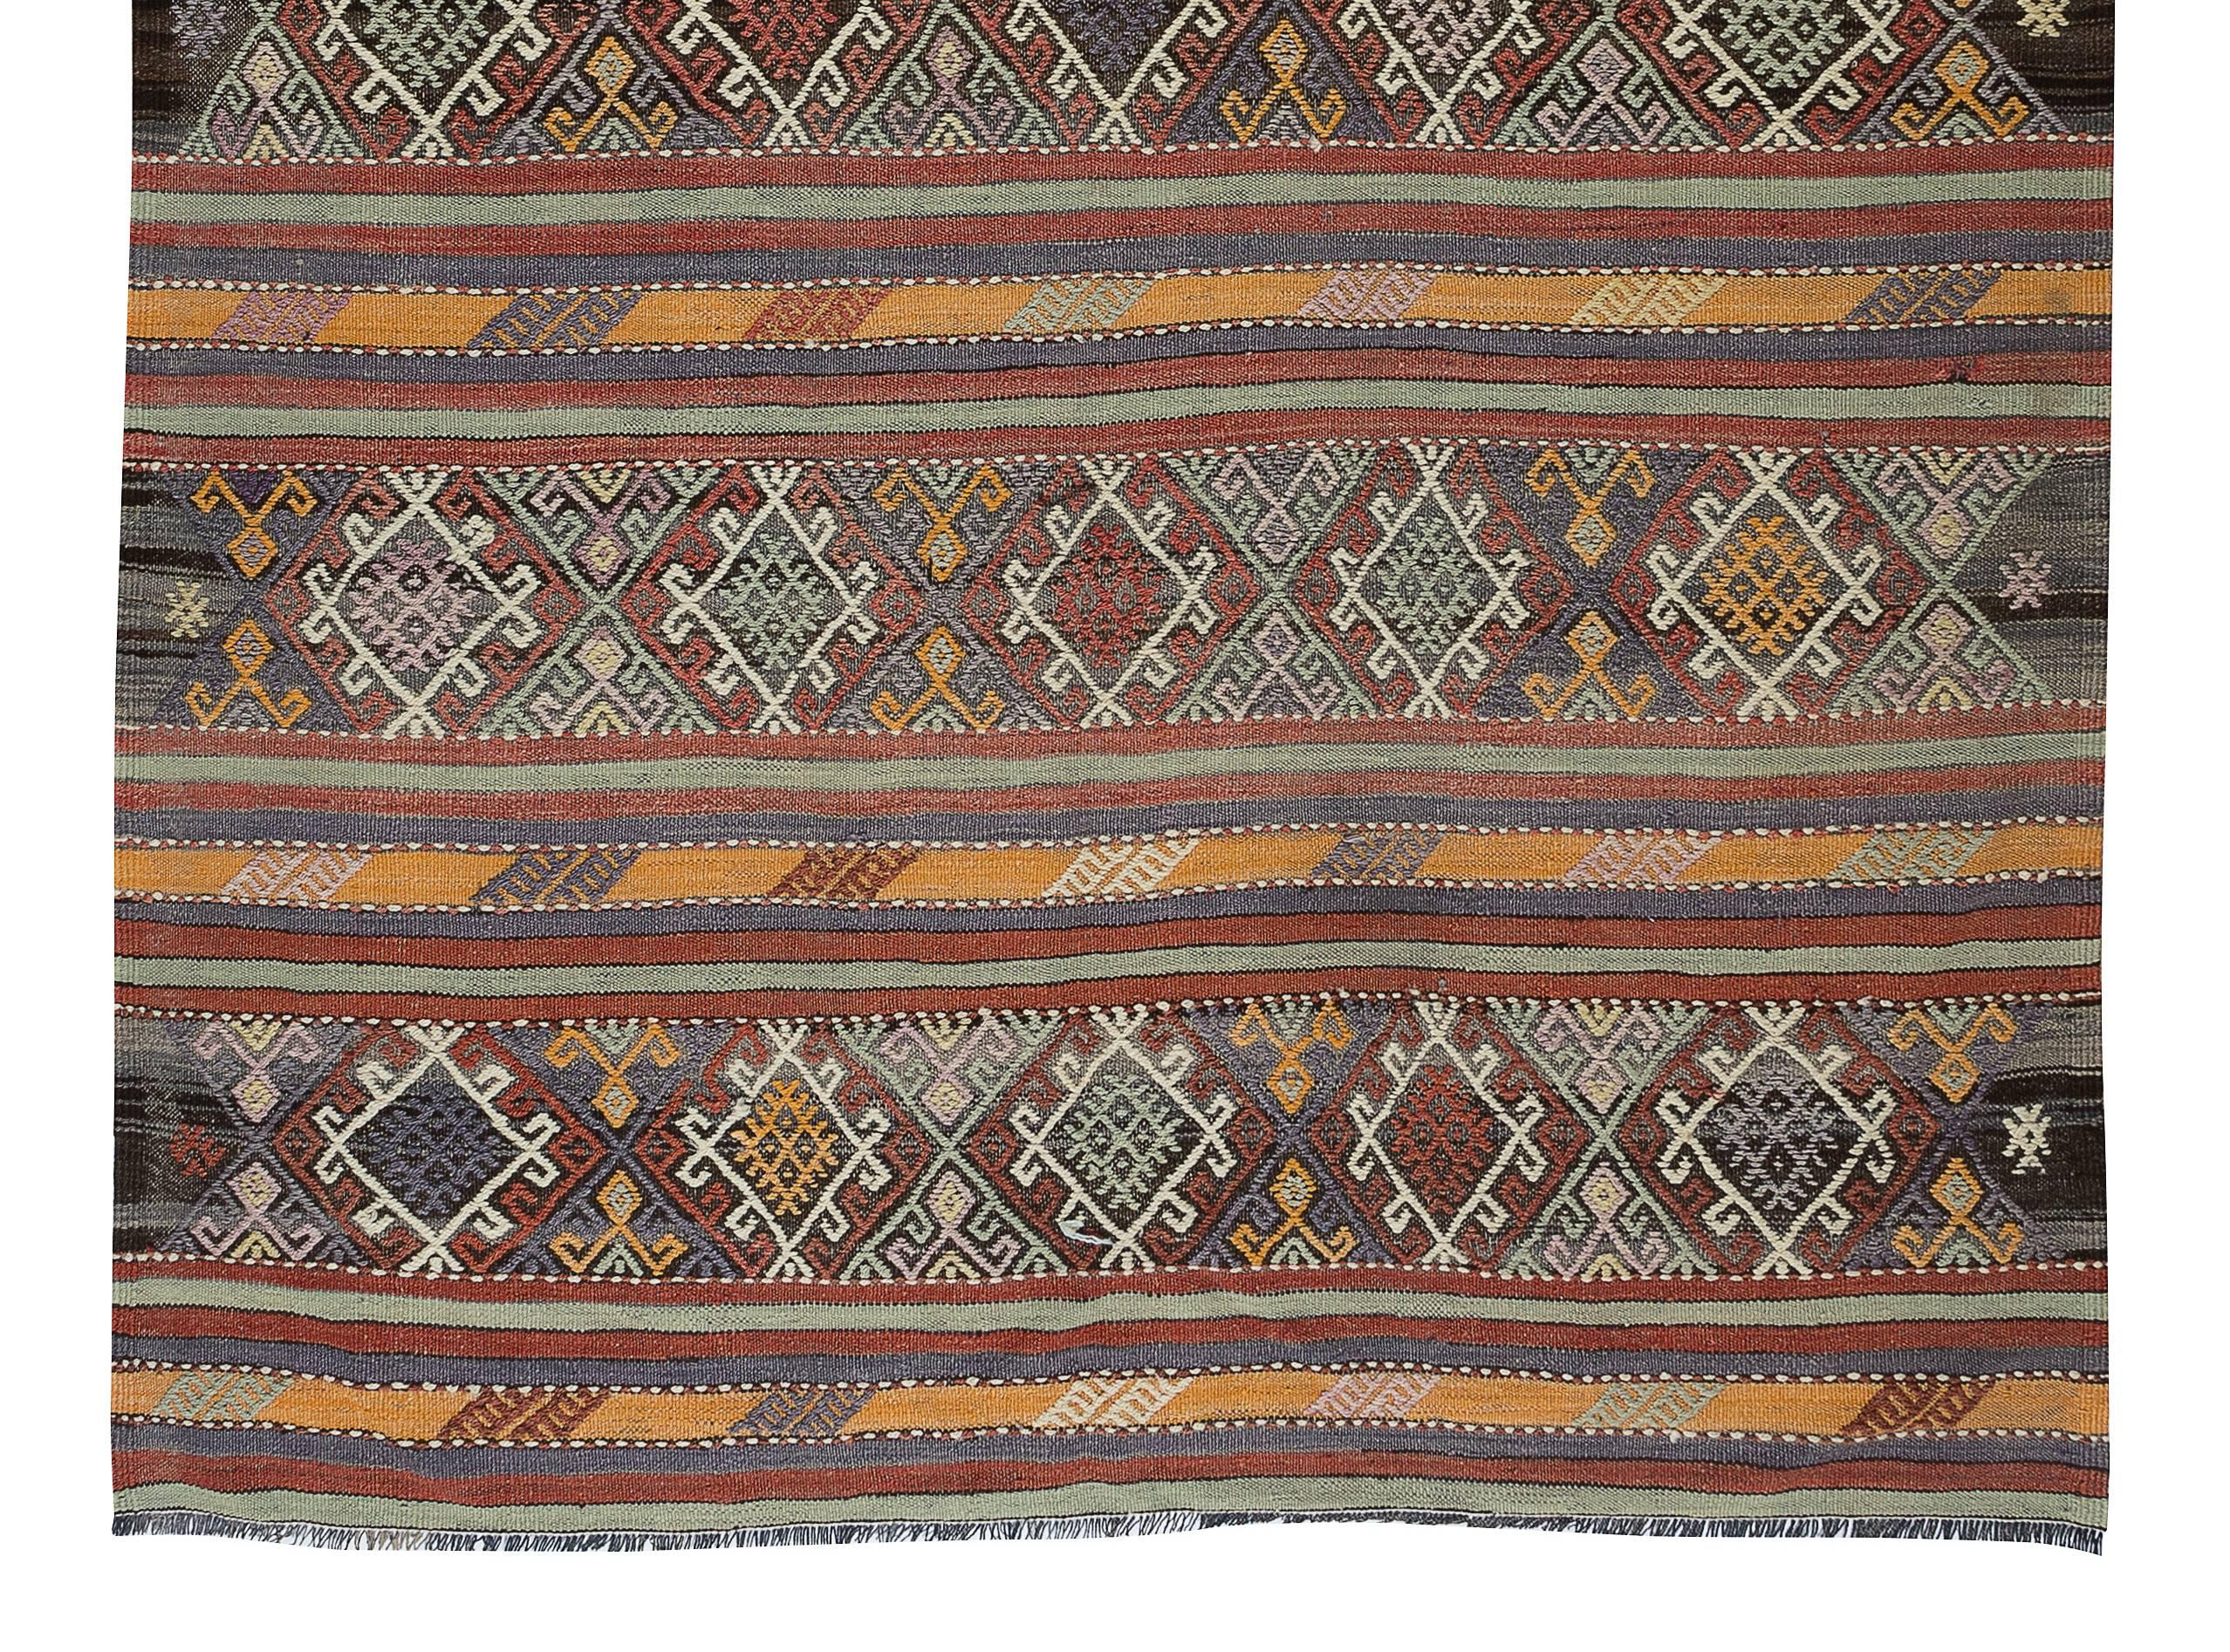 6.2x9 Ft Flat-Weave Vintage Turkish Wool Kilim Rug, Hand-Woven Floor Covering For Sale 1